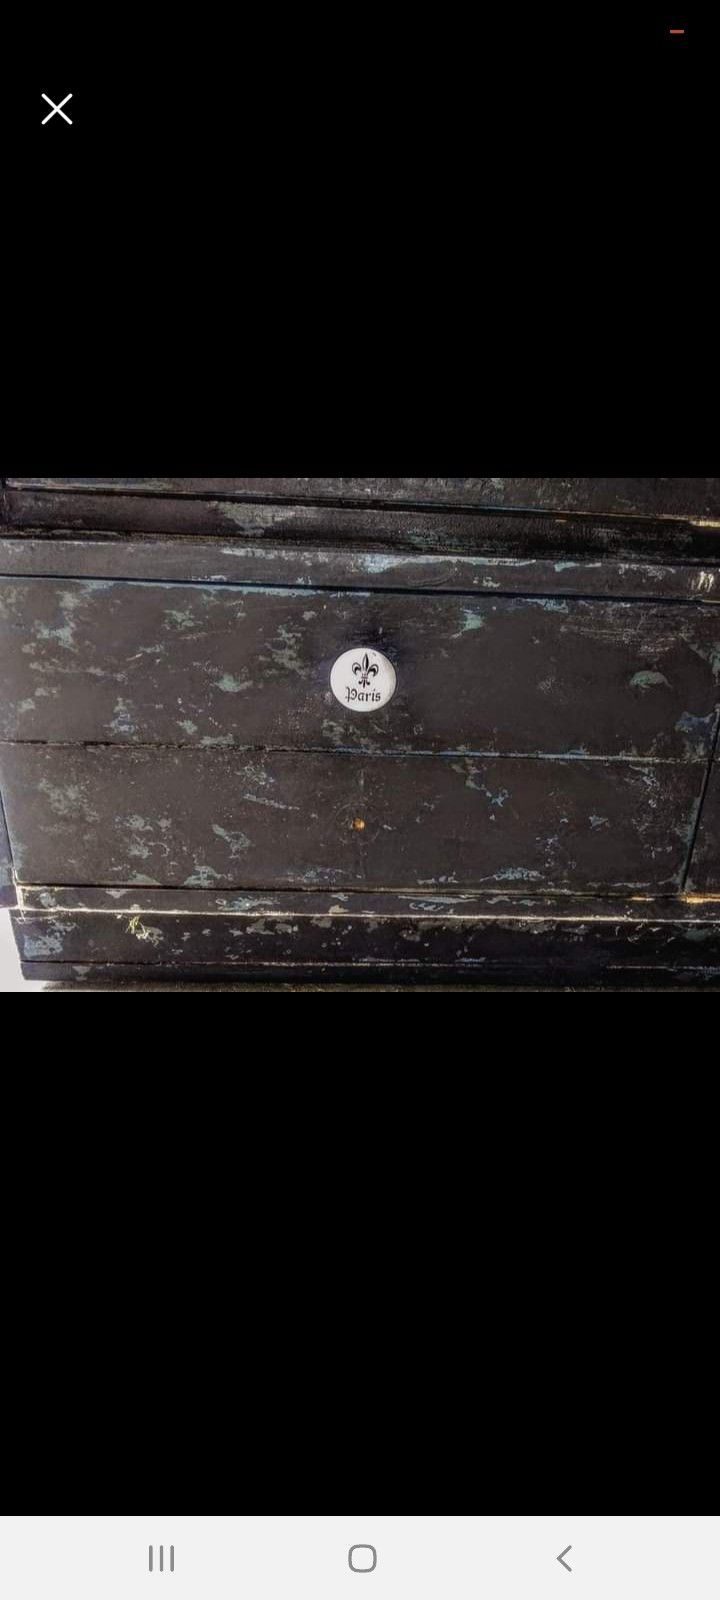 PRICE REDUCED: A STEAL AT JUST $45! A 1 OF A KIND, CLASSY, BLACK, 6-DRAWER DRESSER!

